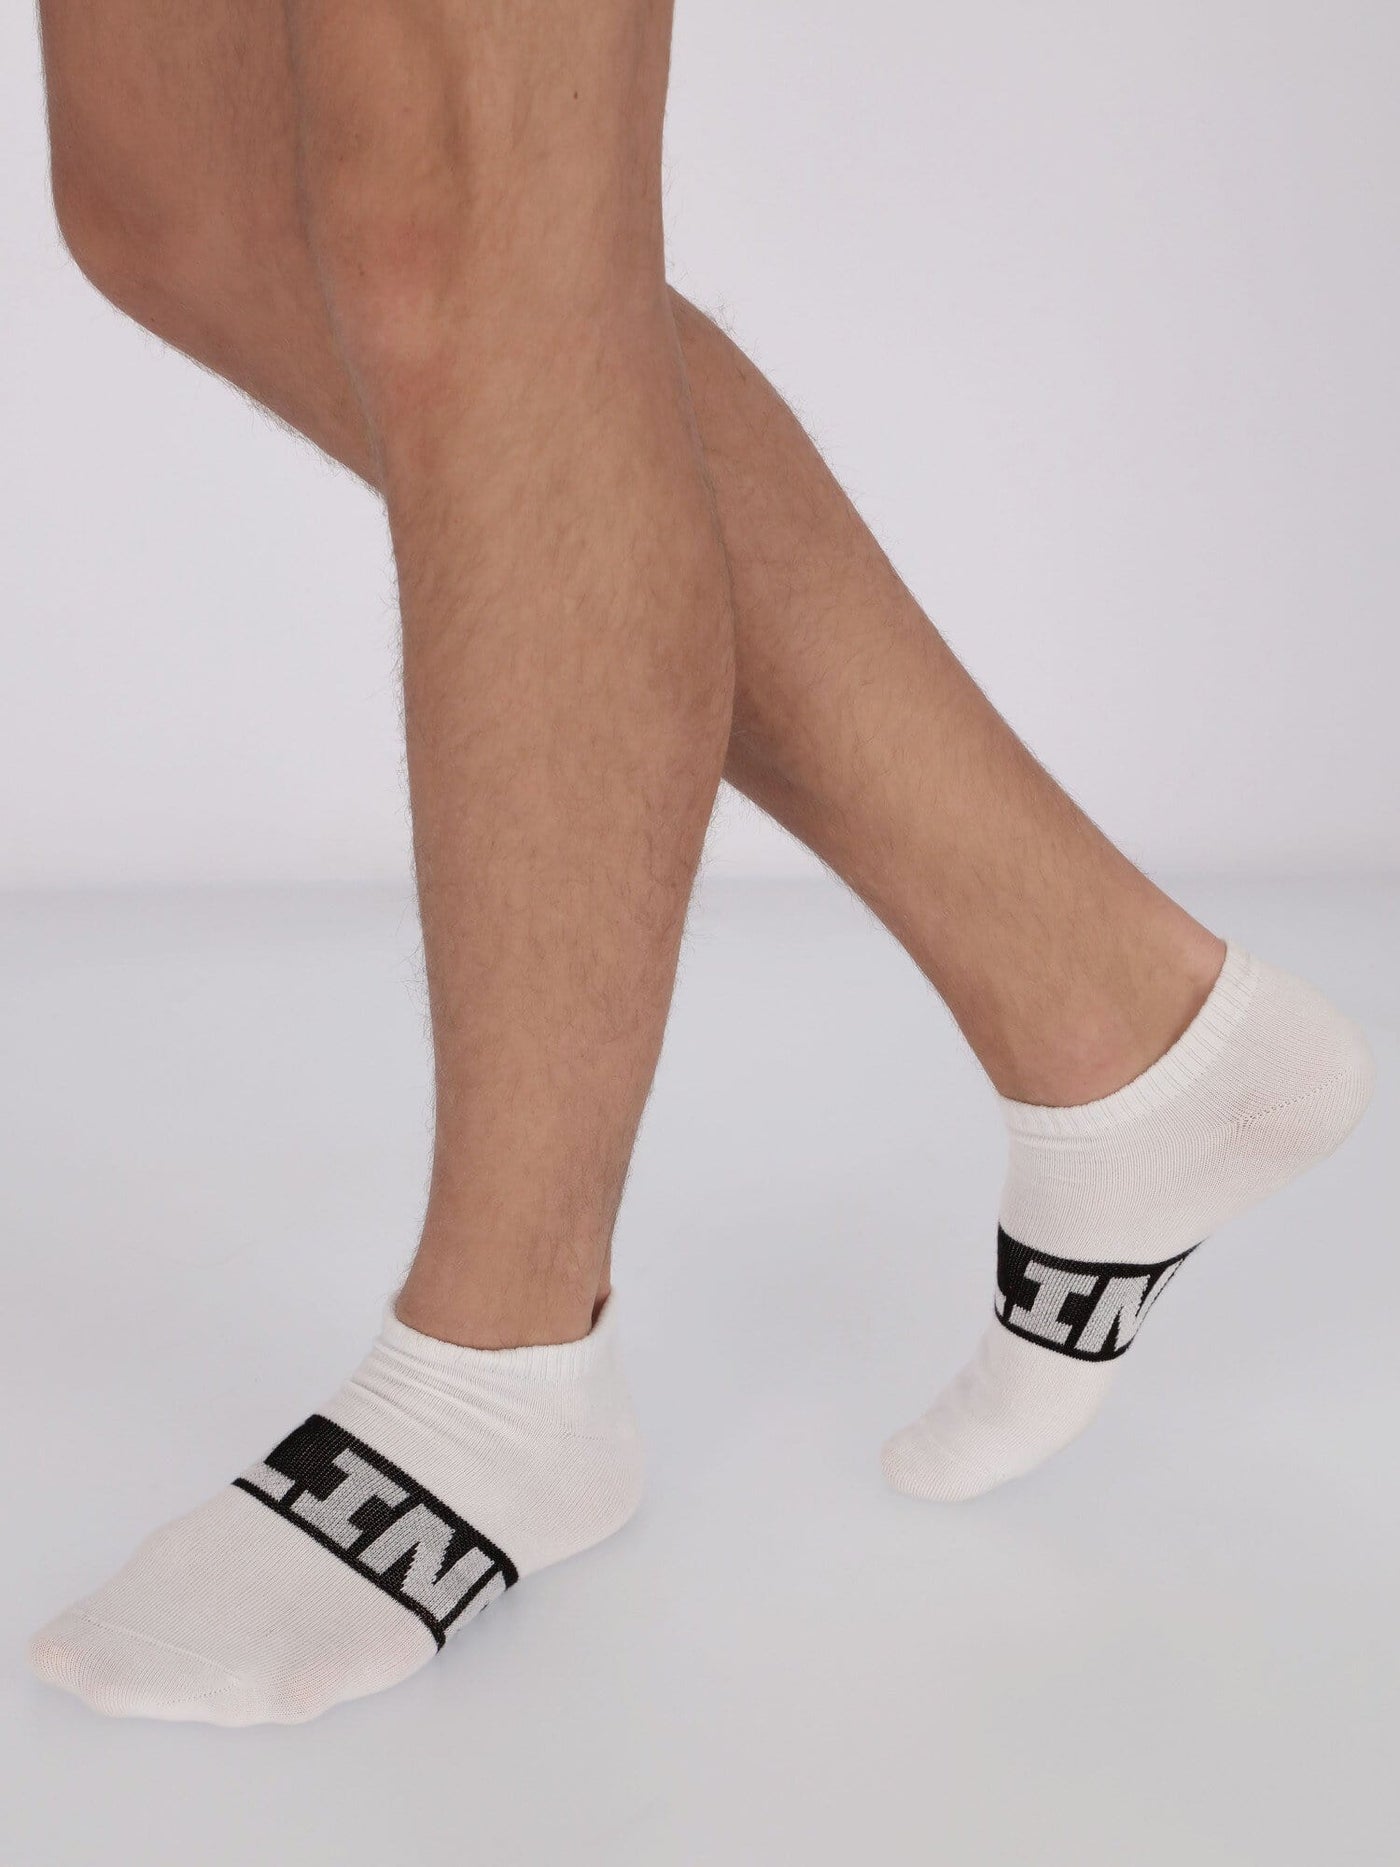 OR Other Accessories WHITE / Os 3 Pairs Offline Low Cut Socks